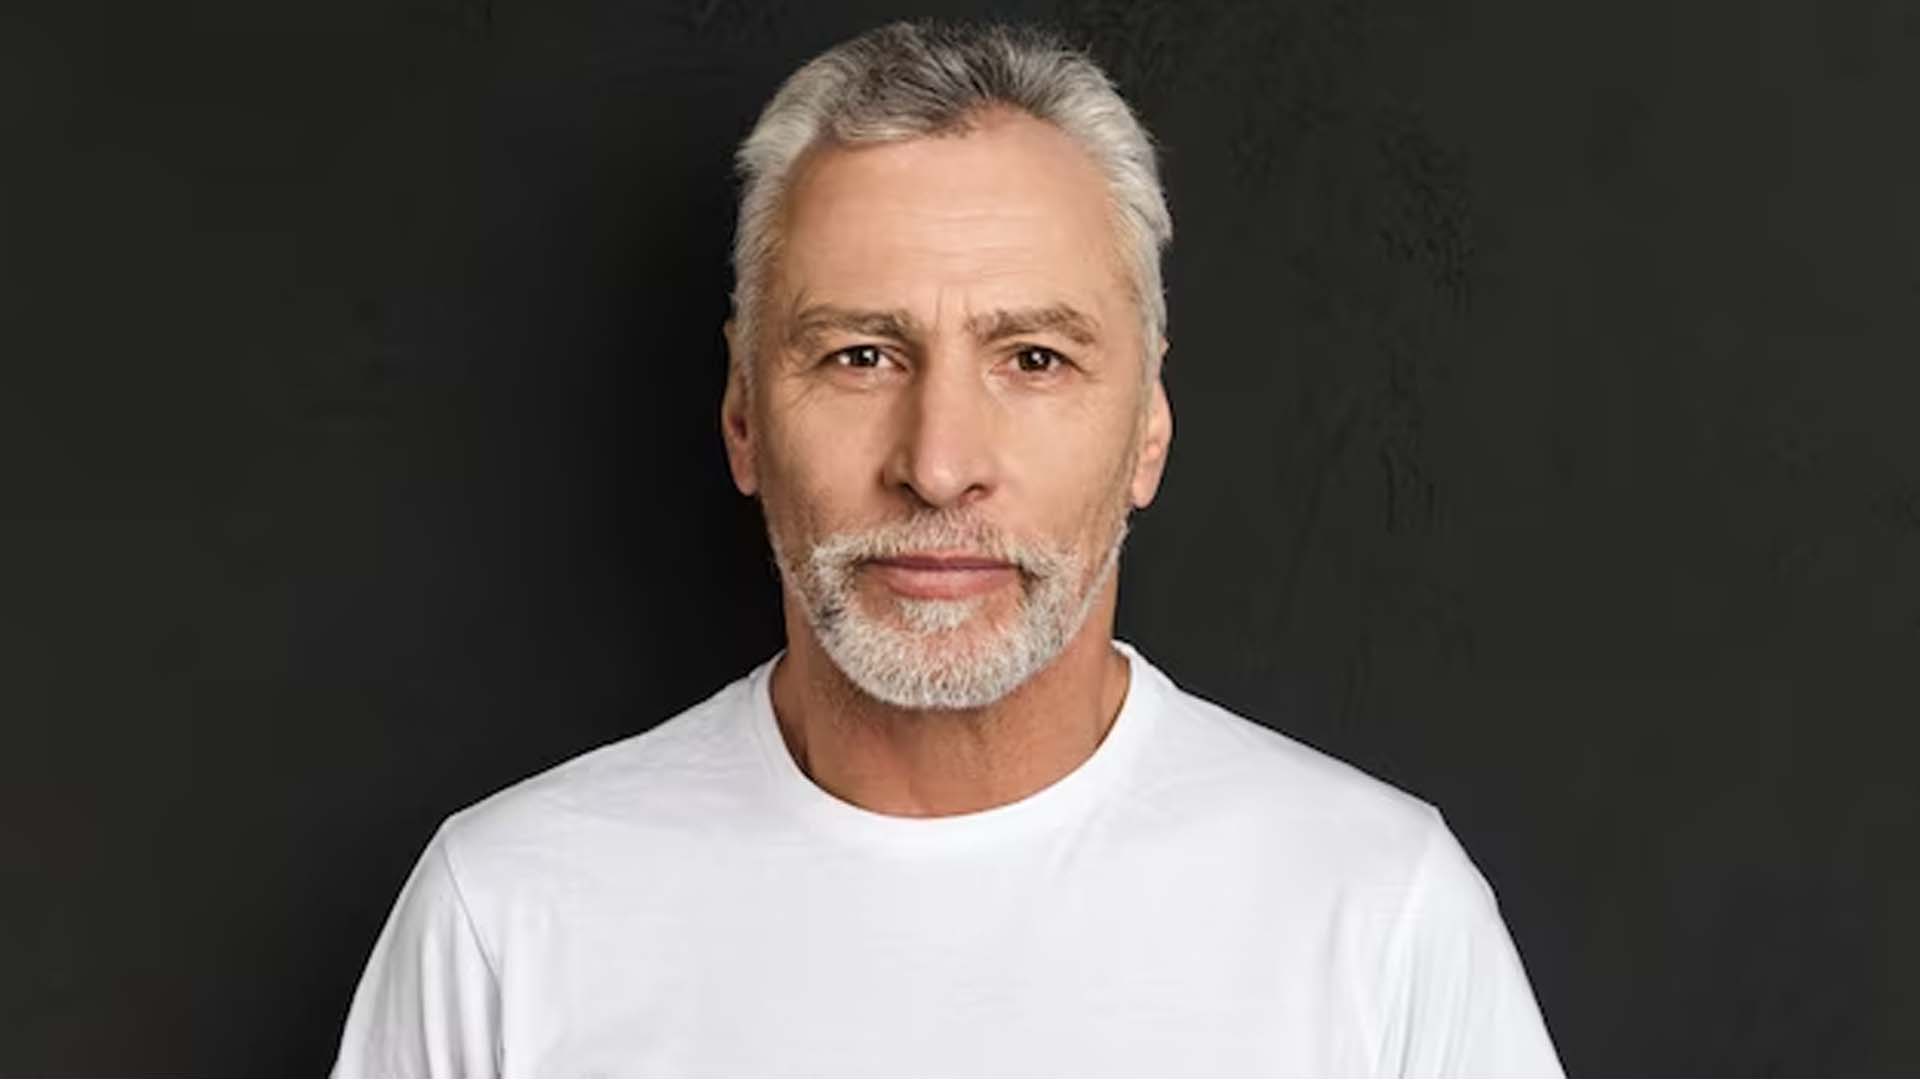 Man with White or Gray Hair